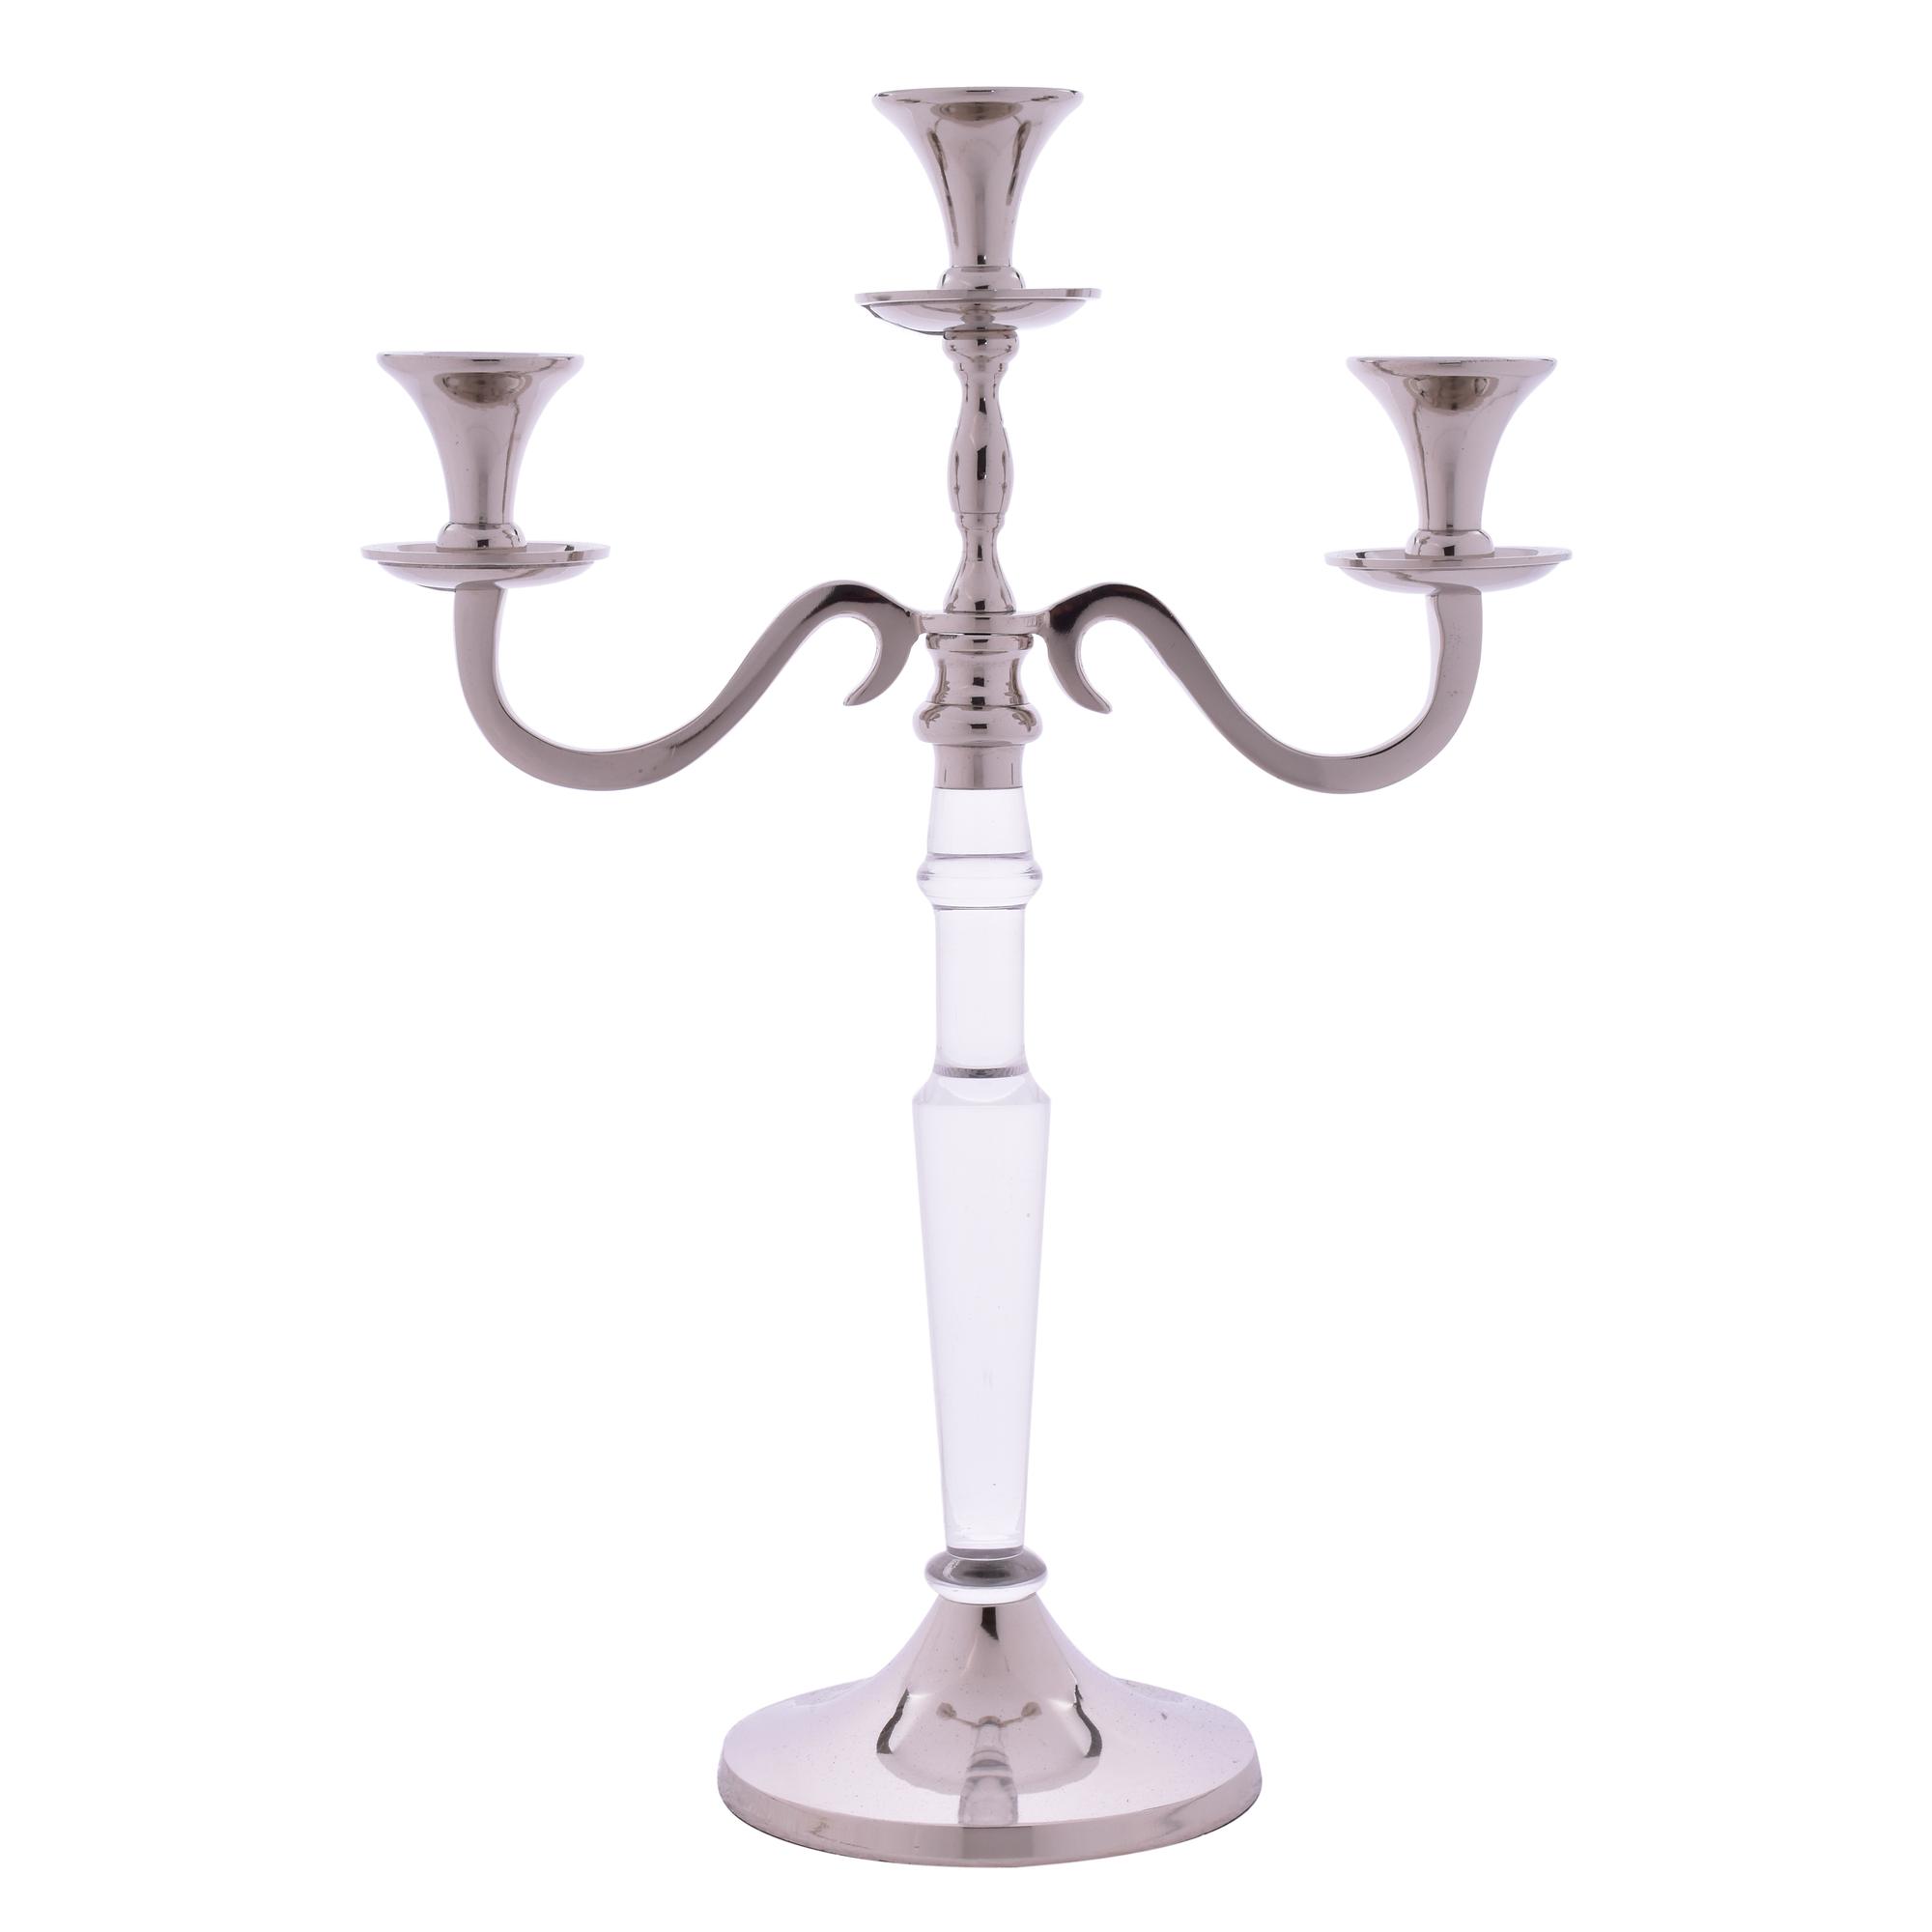 CANDLE HOLDER H - 44.0 W - 29.75 - 429-6200042